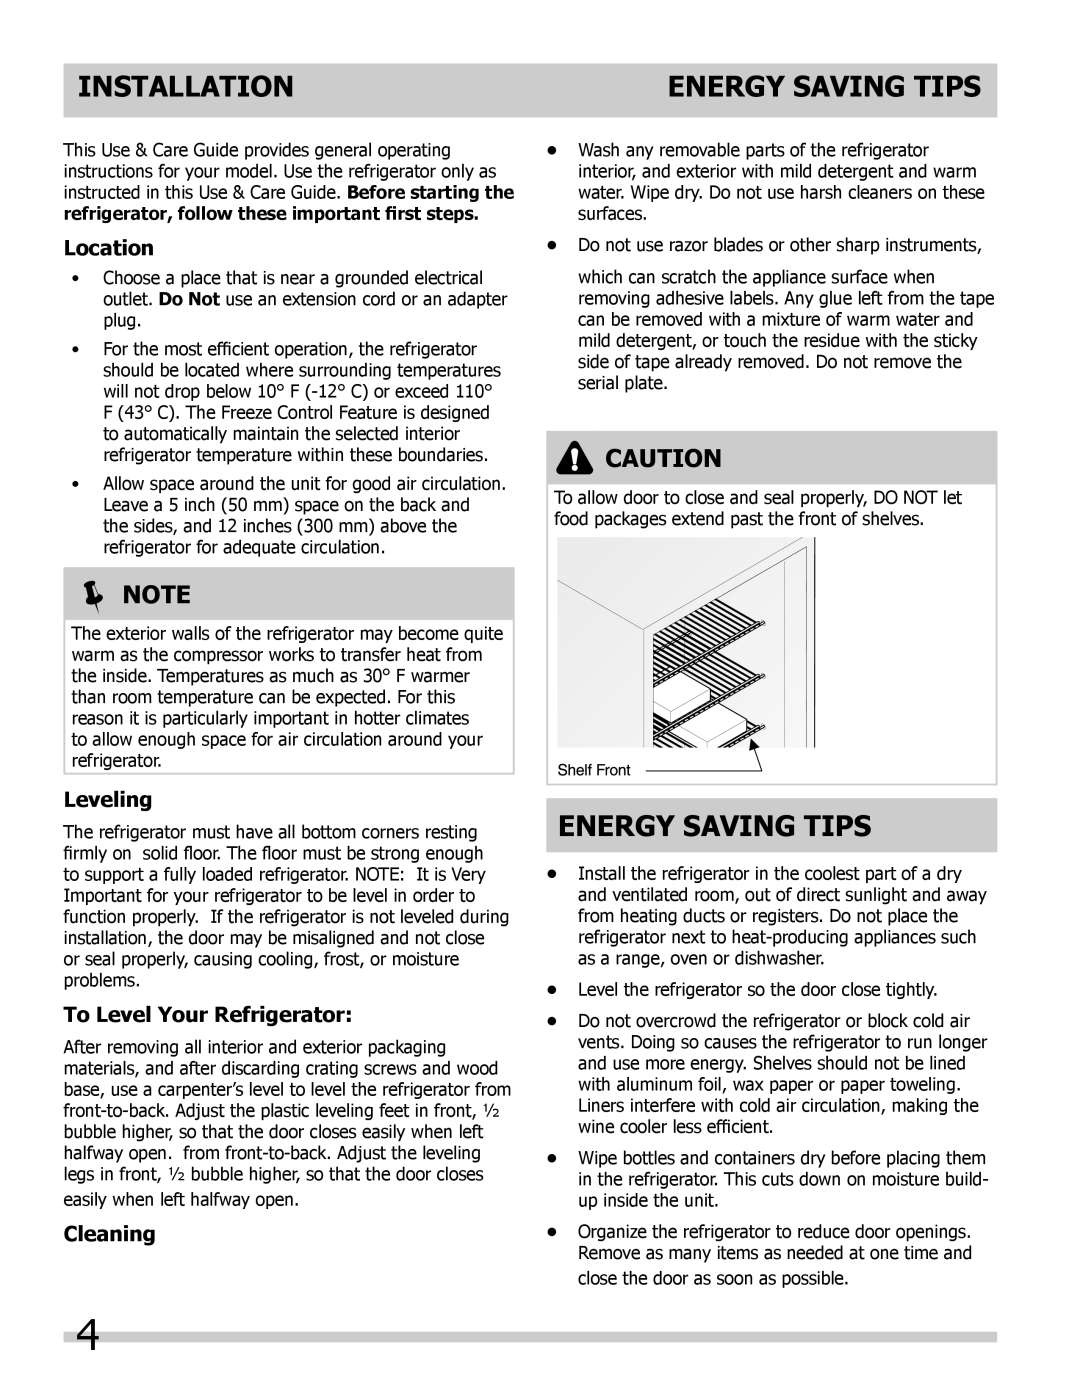 Frigidaire FFHT10F2LW Installation, Energy Saving Tips,  Note, Location, Leveling, To Level Your Refrigerator, Cleaning 